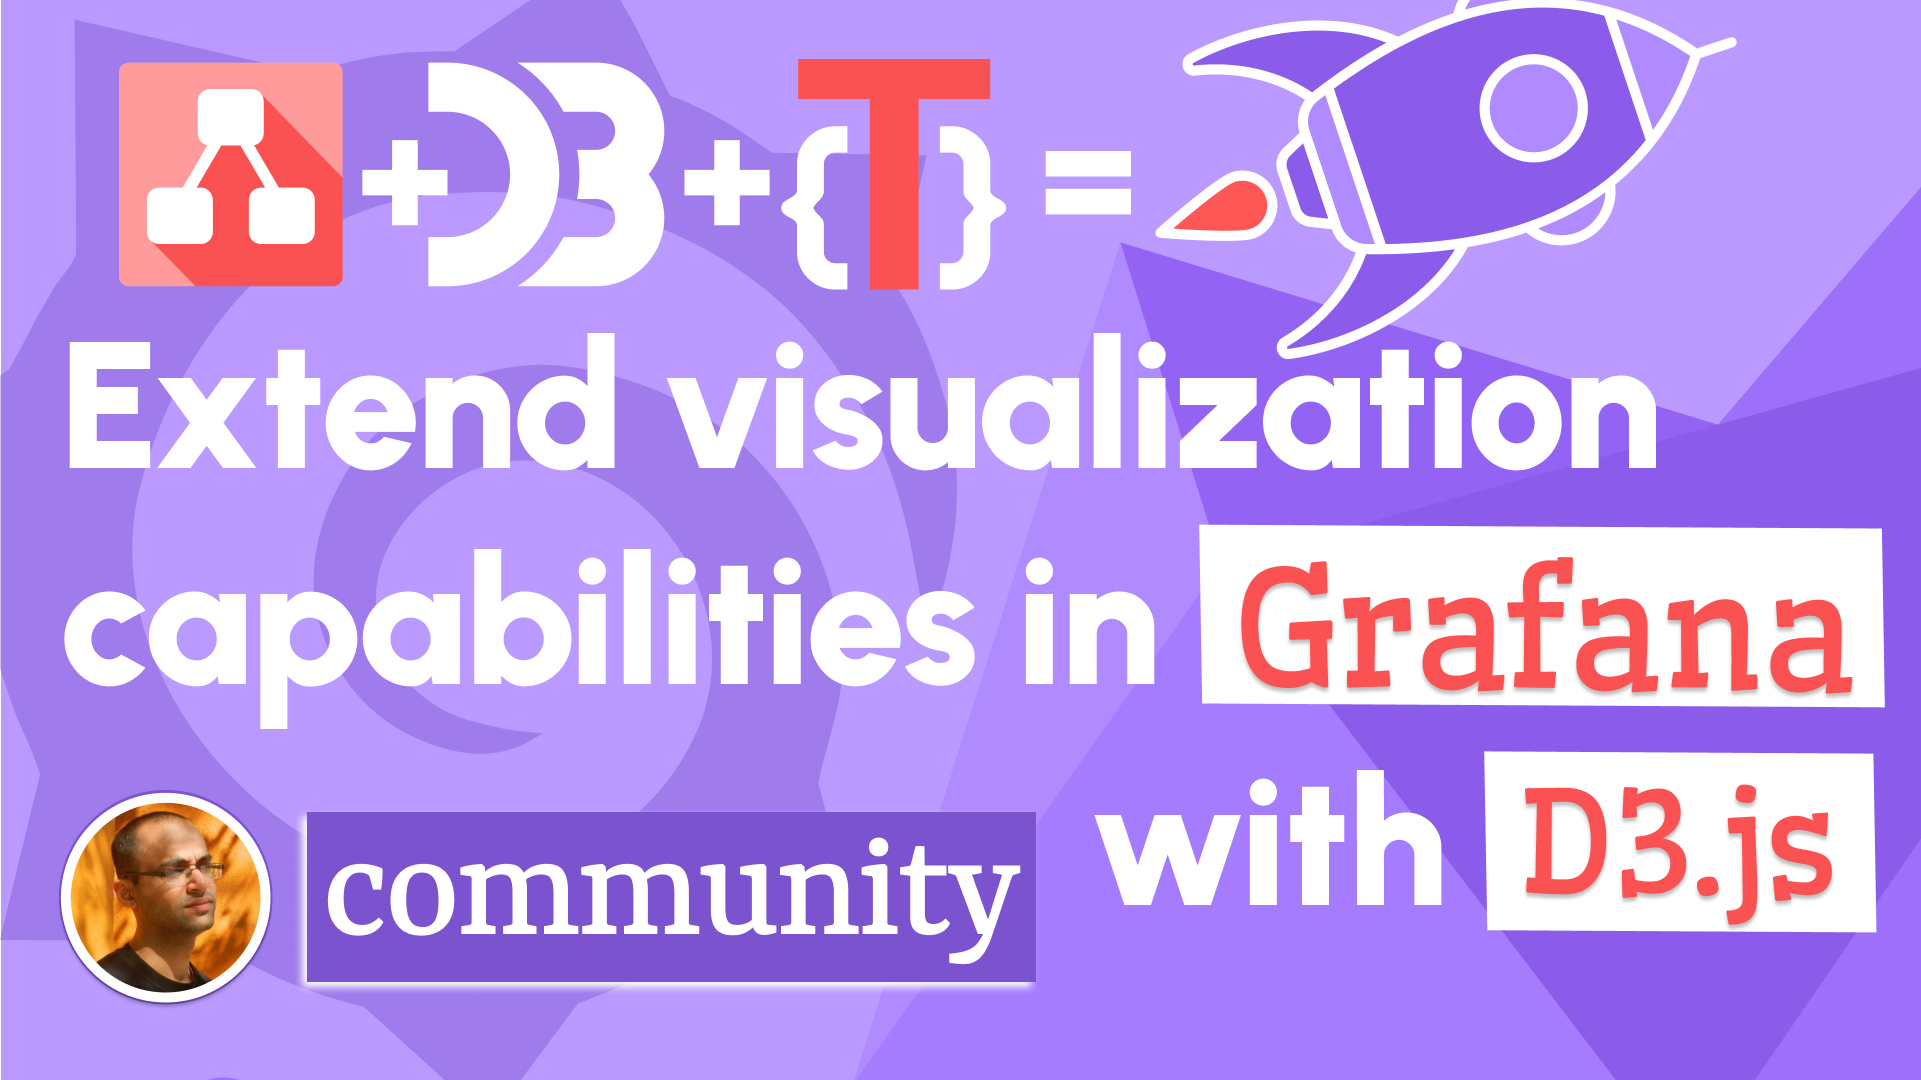 Extend visualization capabilities with D3.js